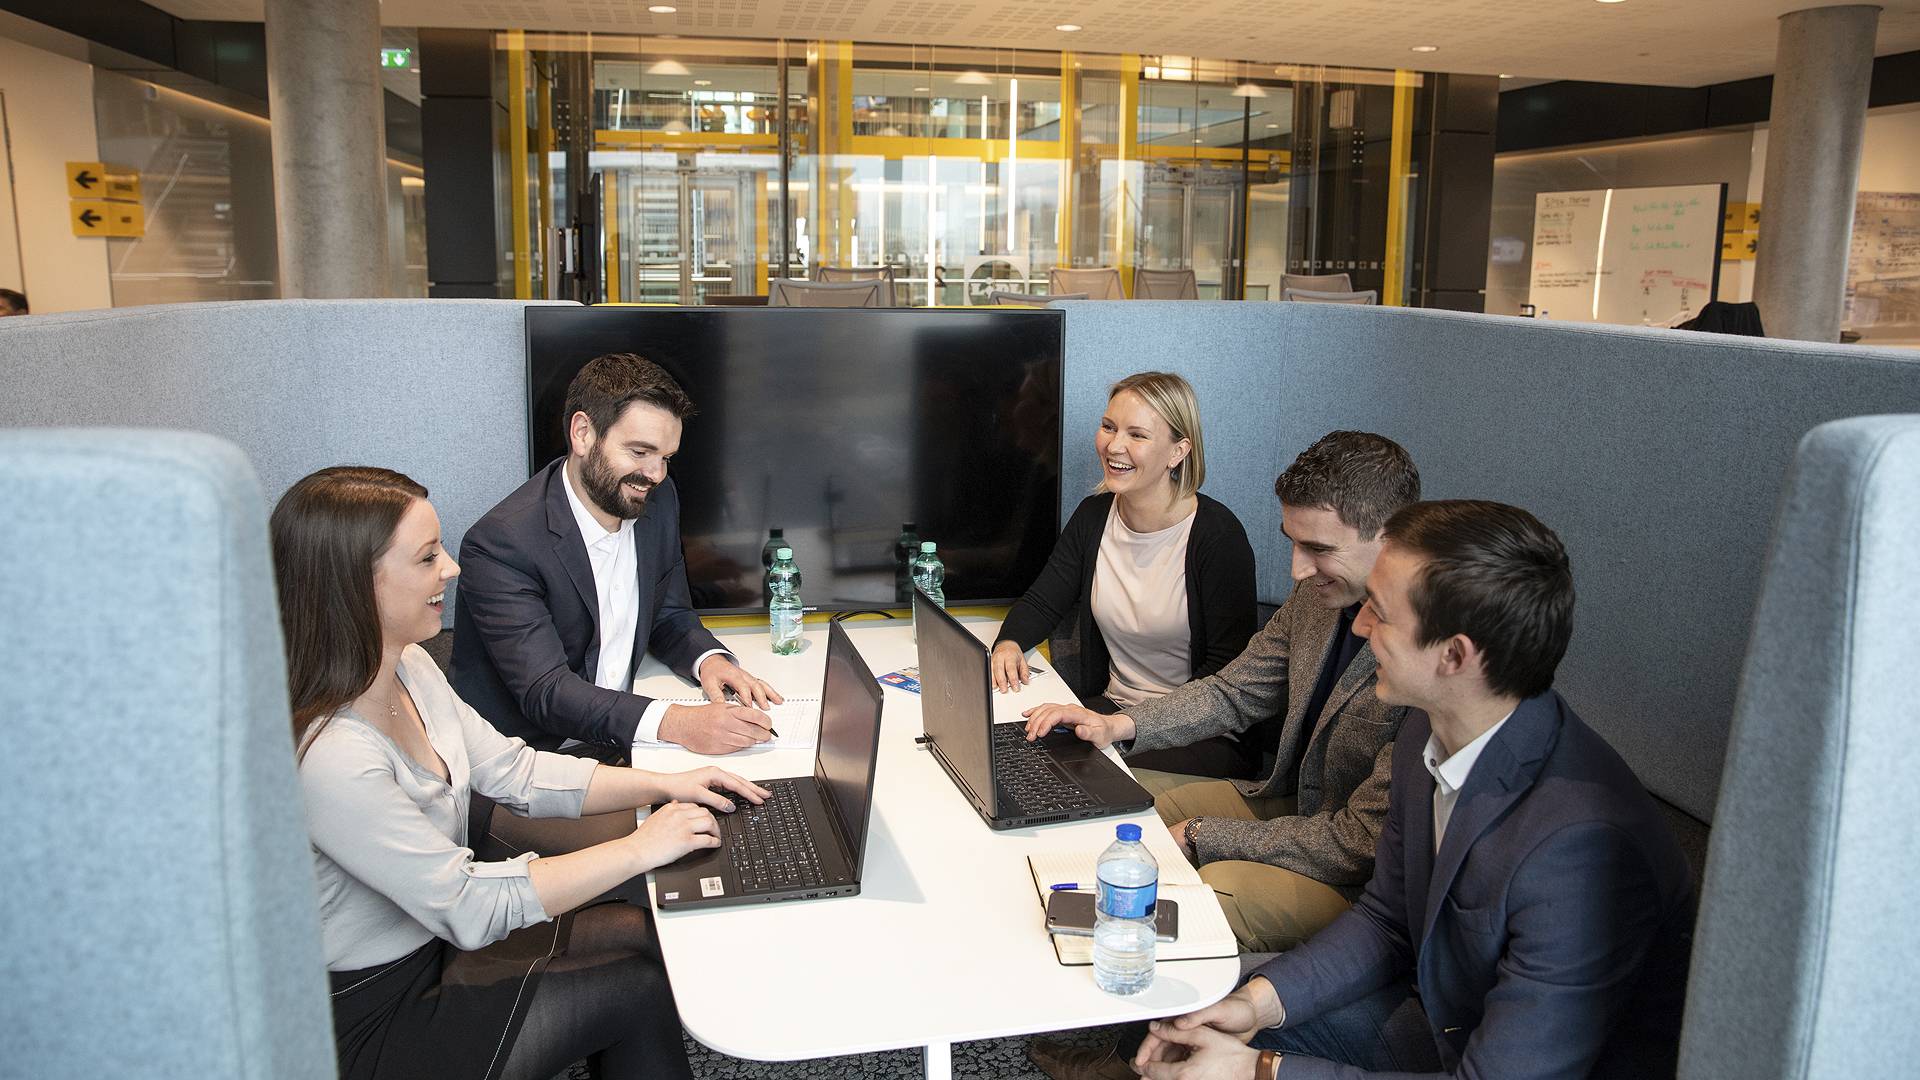 Office - Group of people in huddle space